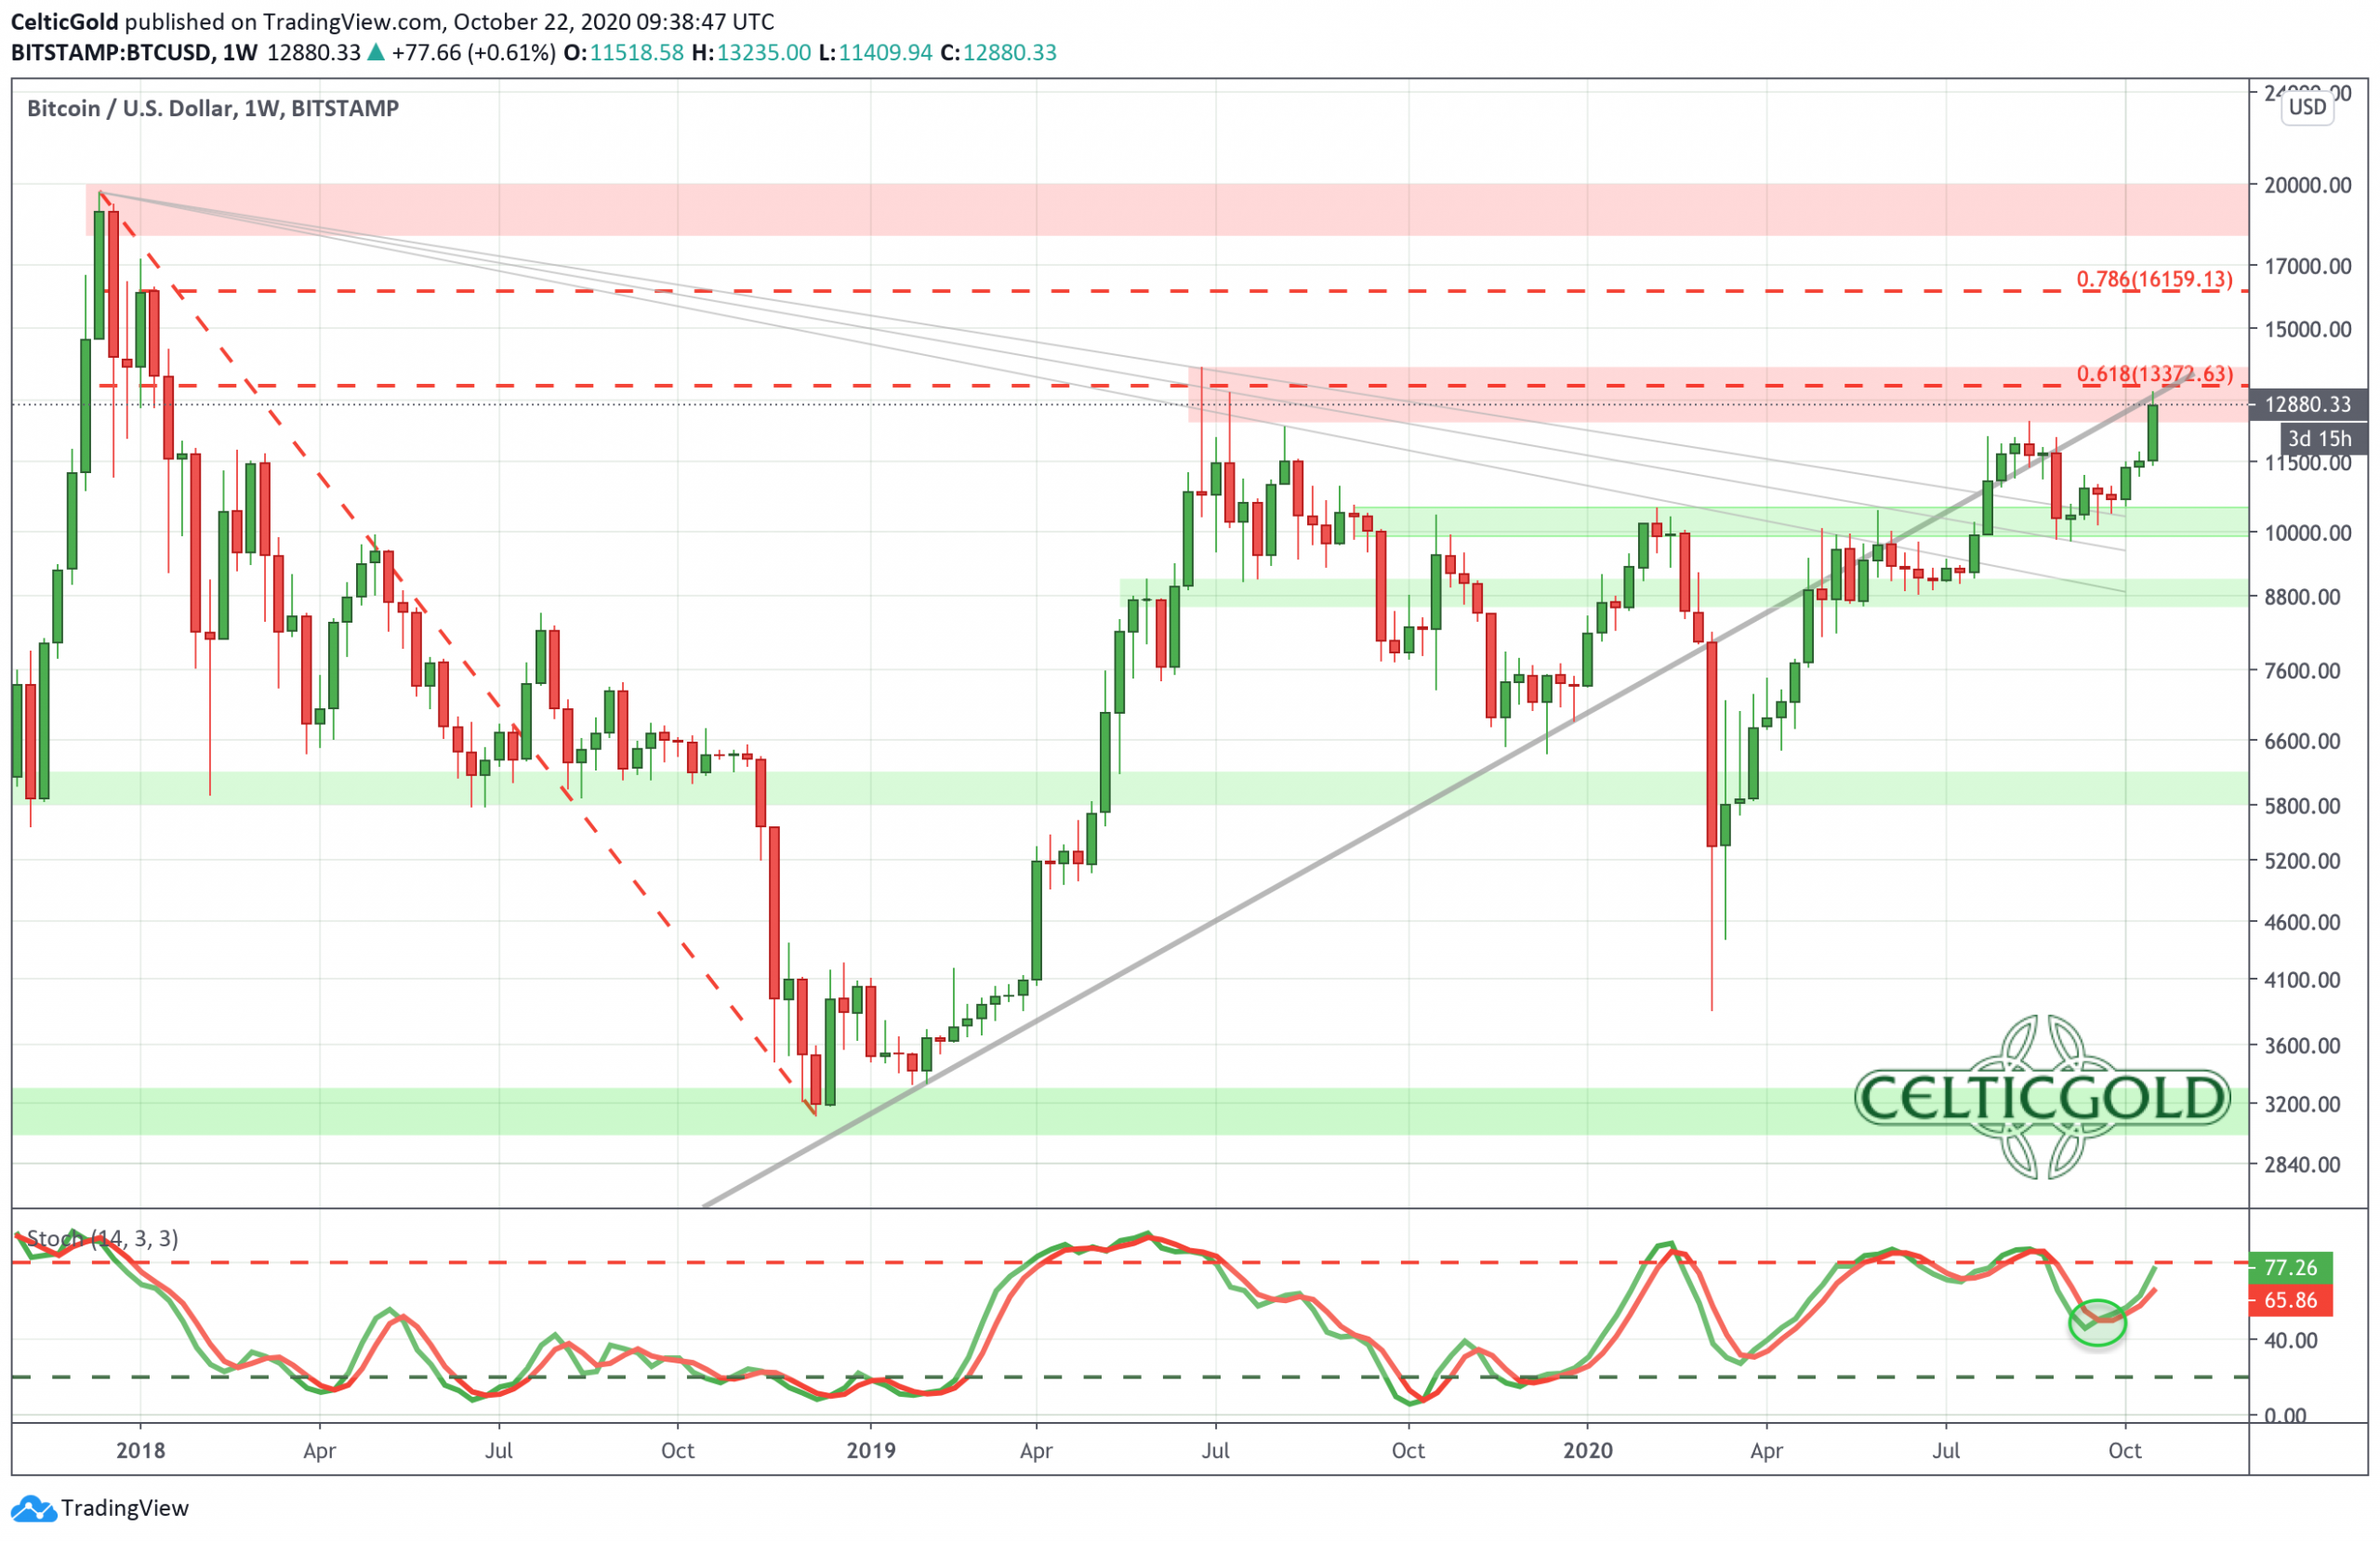 Bitcoin Weekly Chart as of October 22nd 2020, Source: Tradingview. Bitcoin - Strong Performance